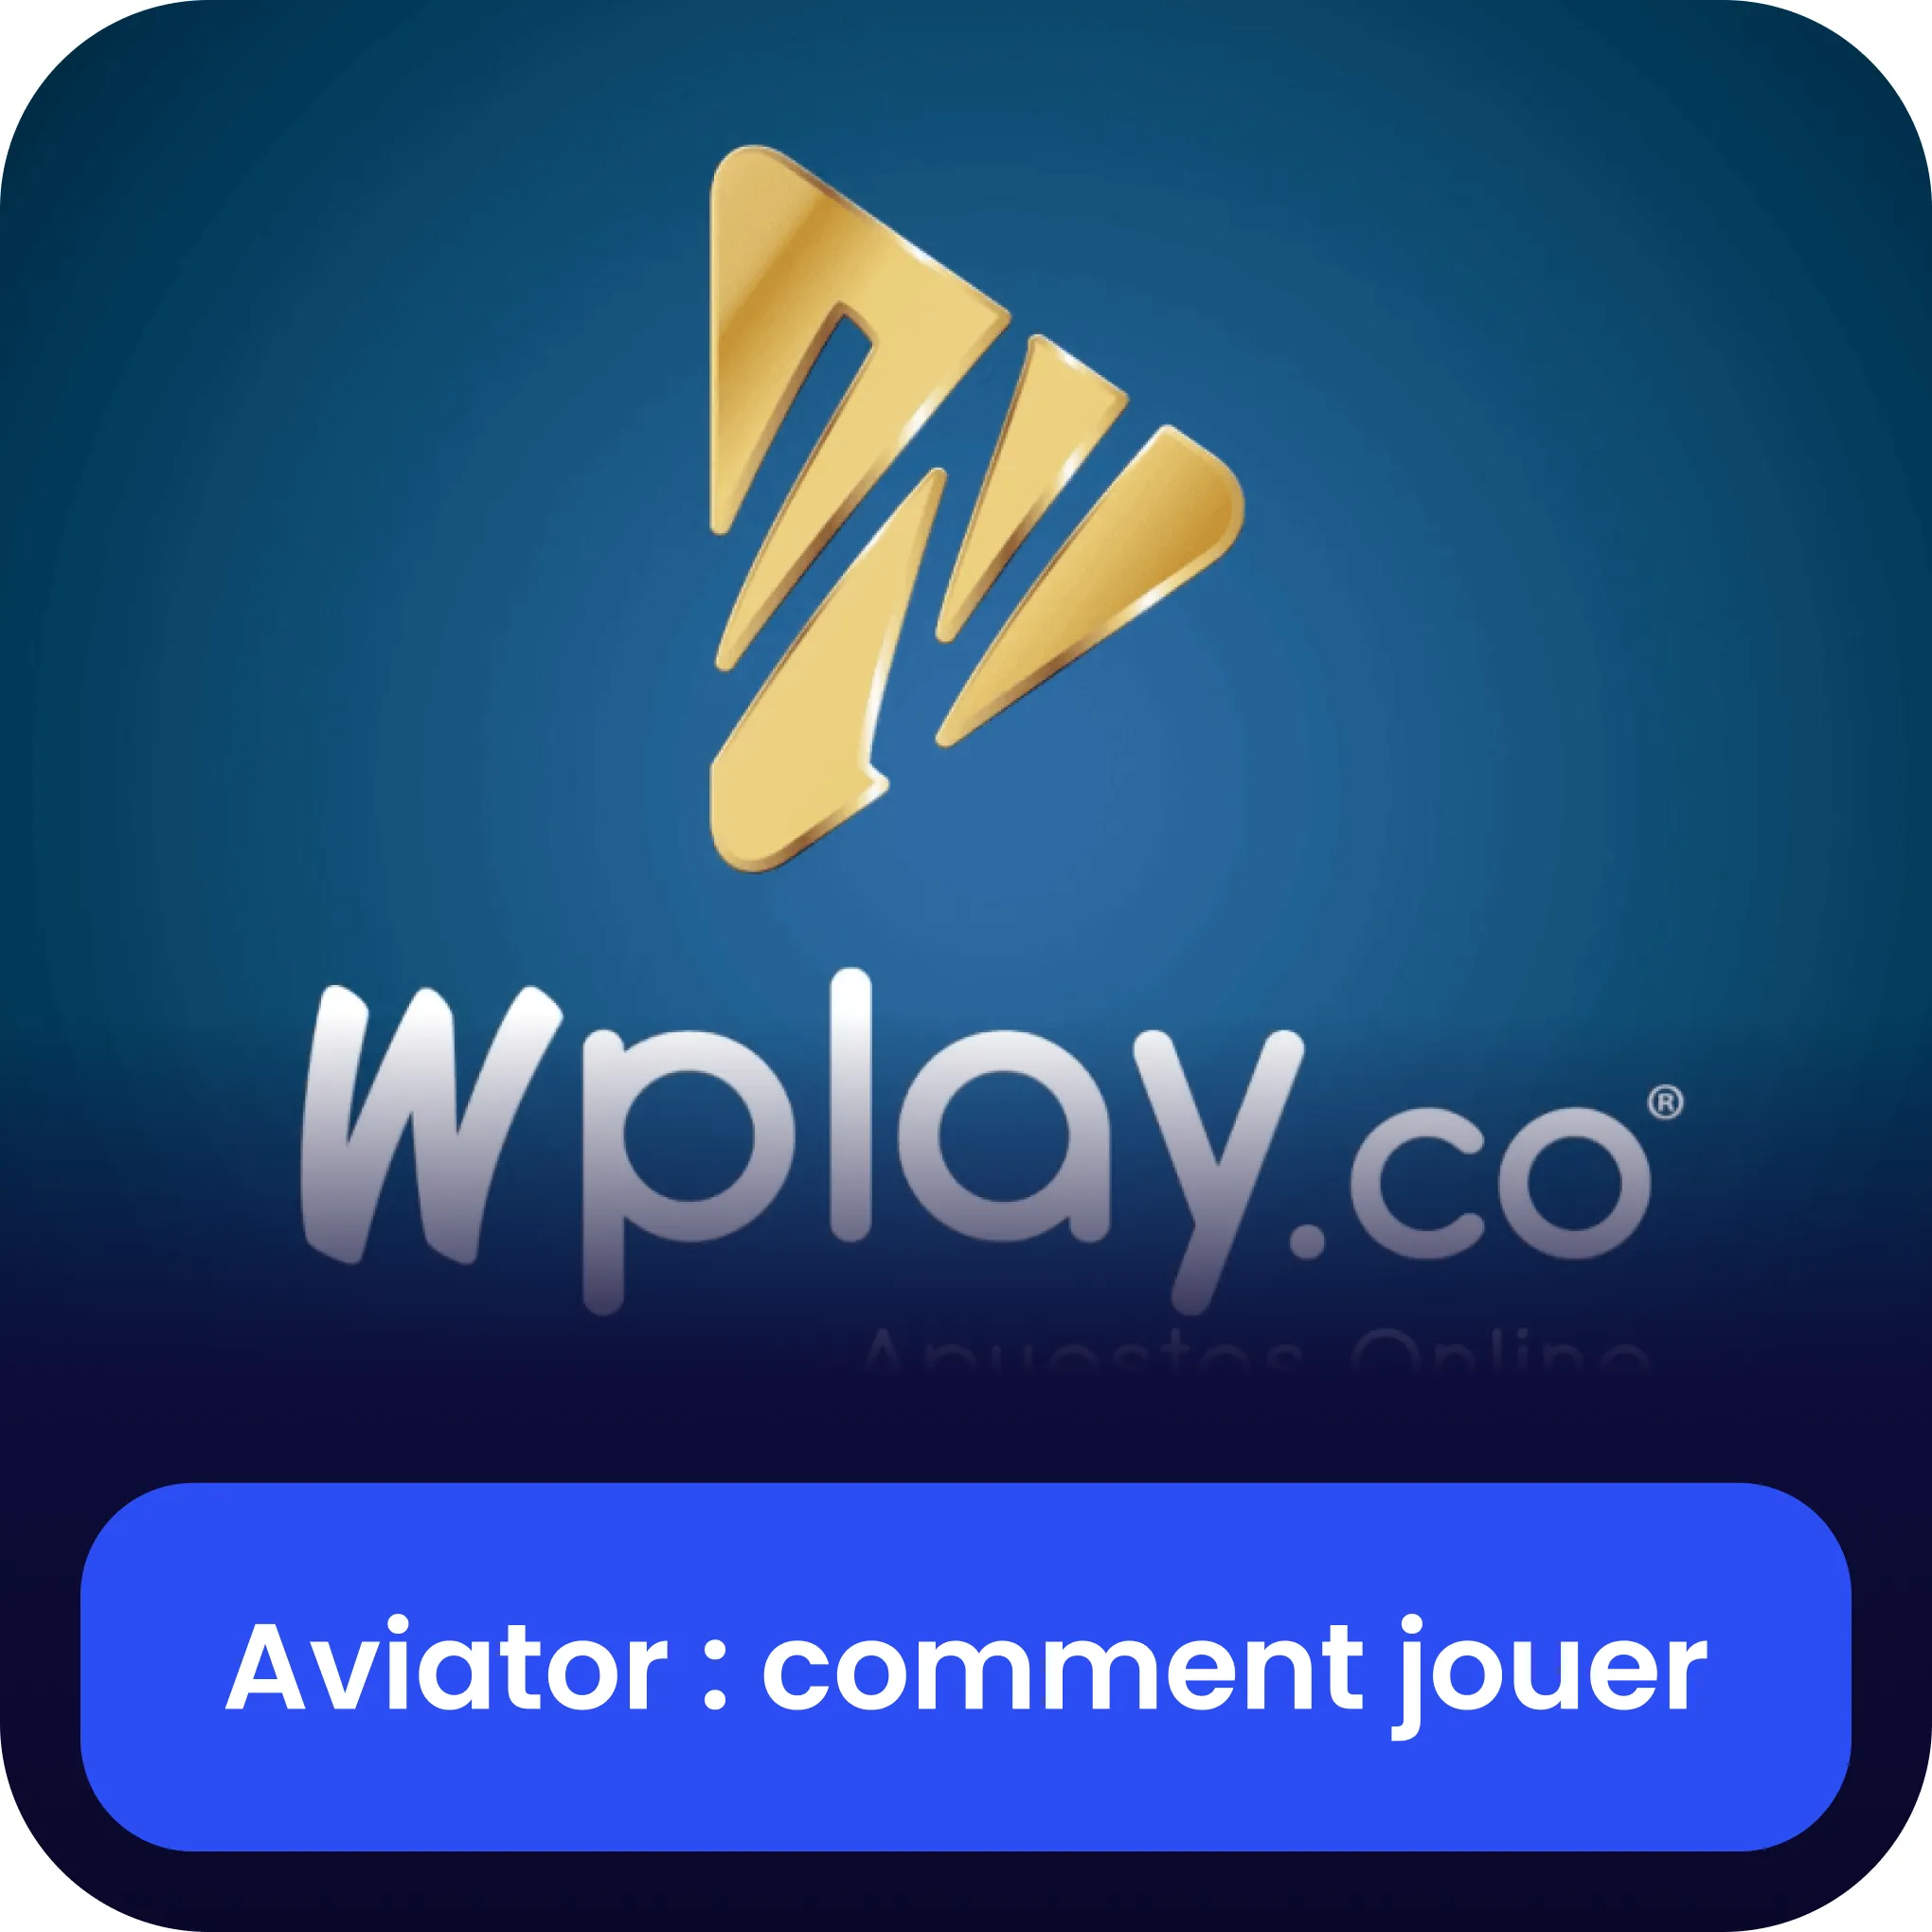 wplay comment jouer aviator